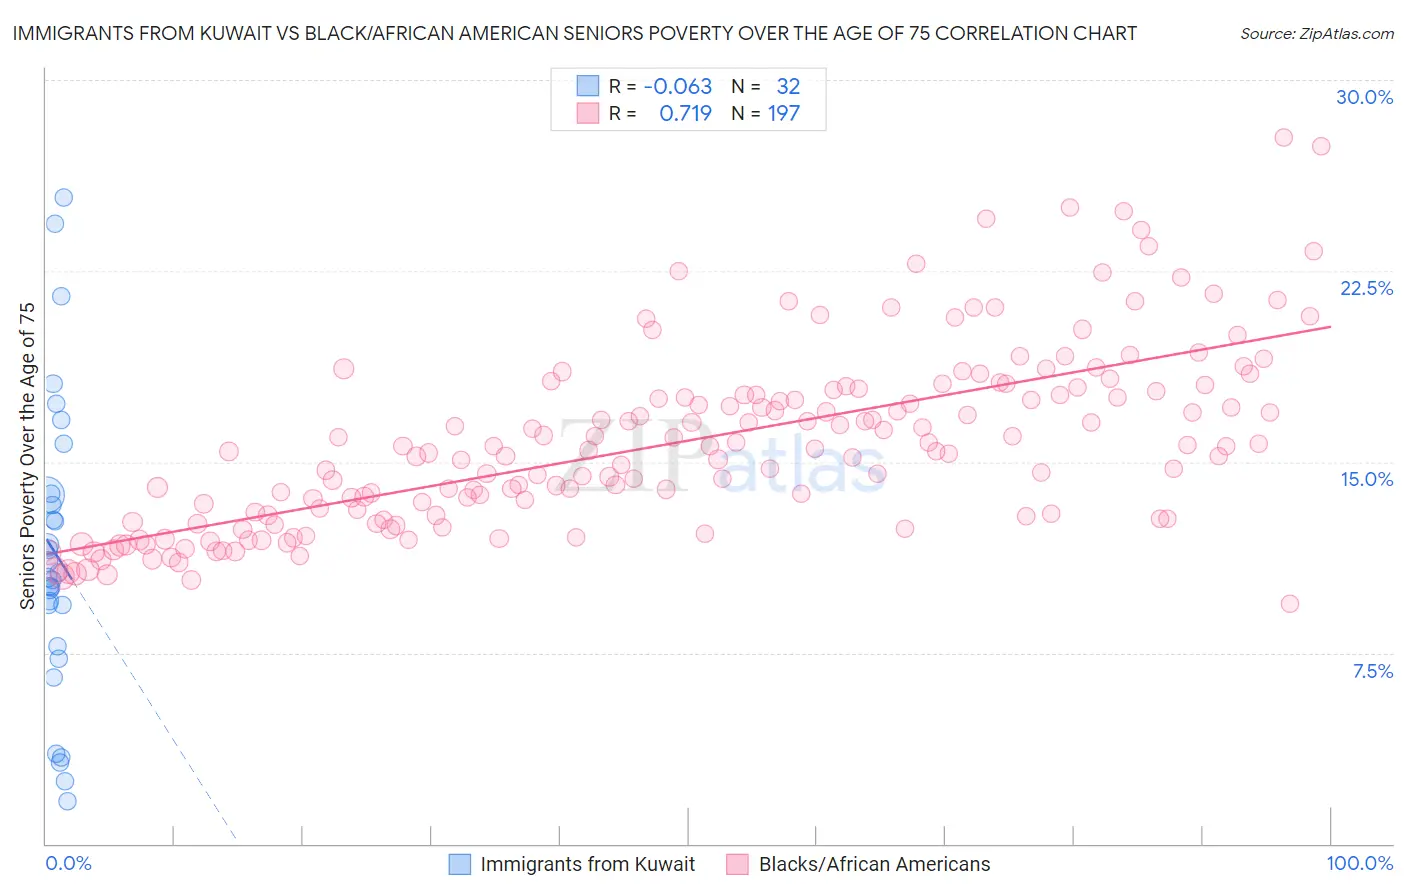 Immigrants from Kuwait vs Black/African American Seniors Poverty Over the Age of 75